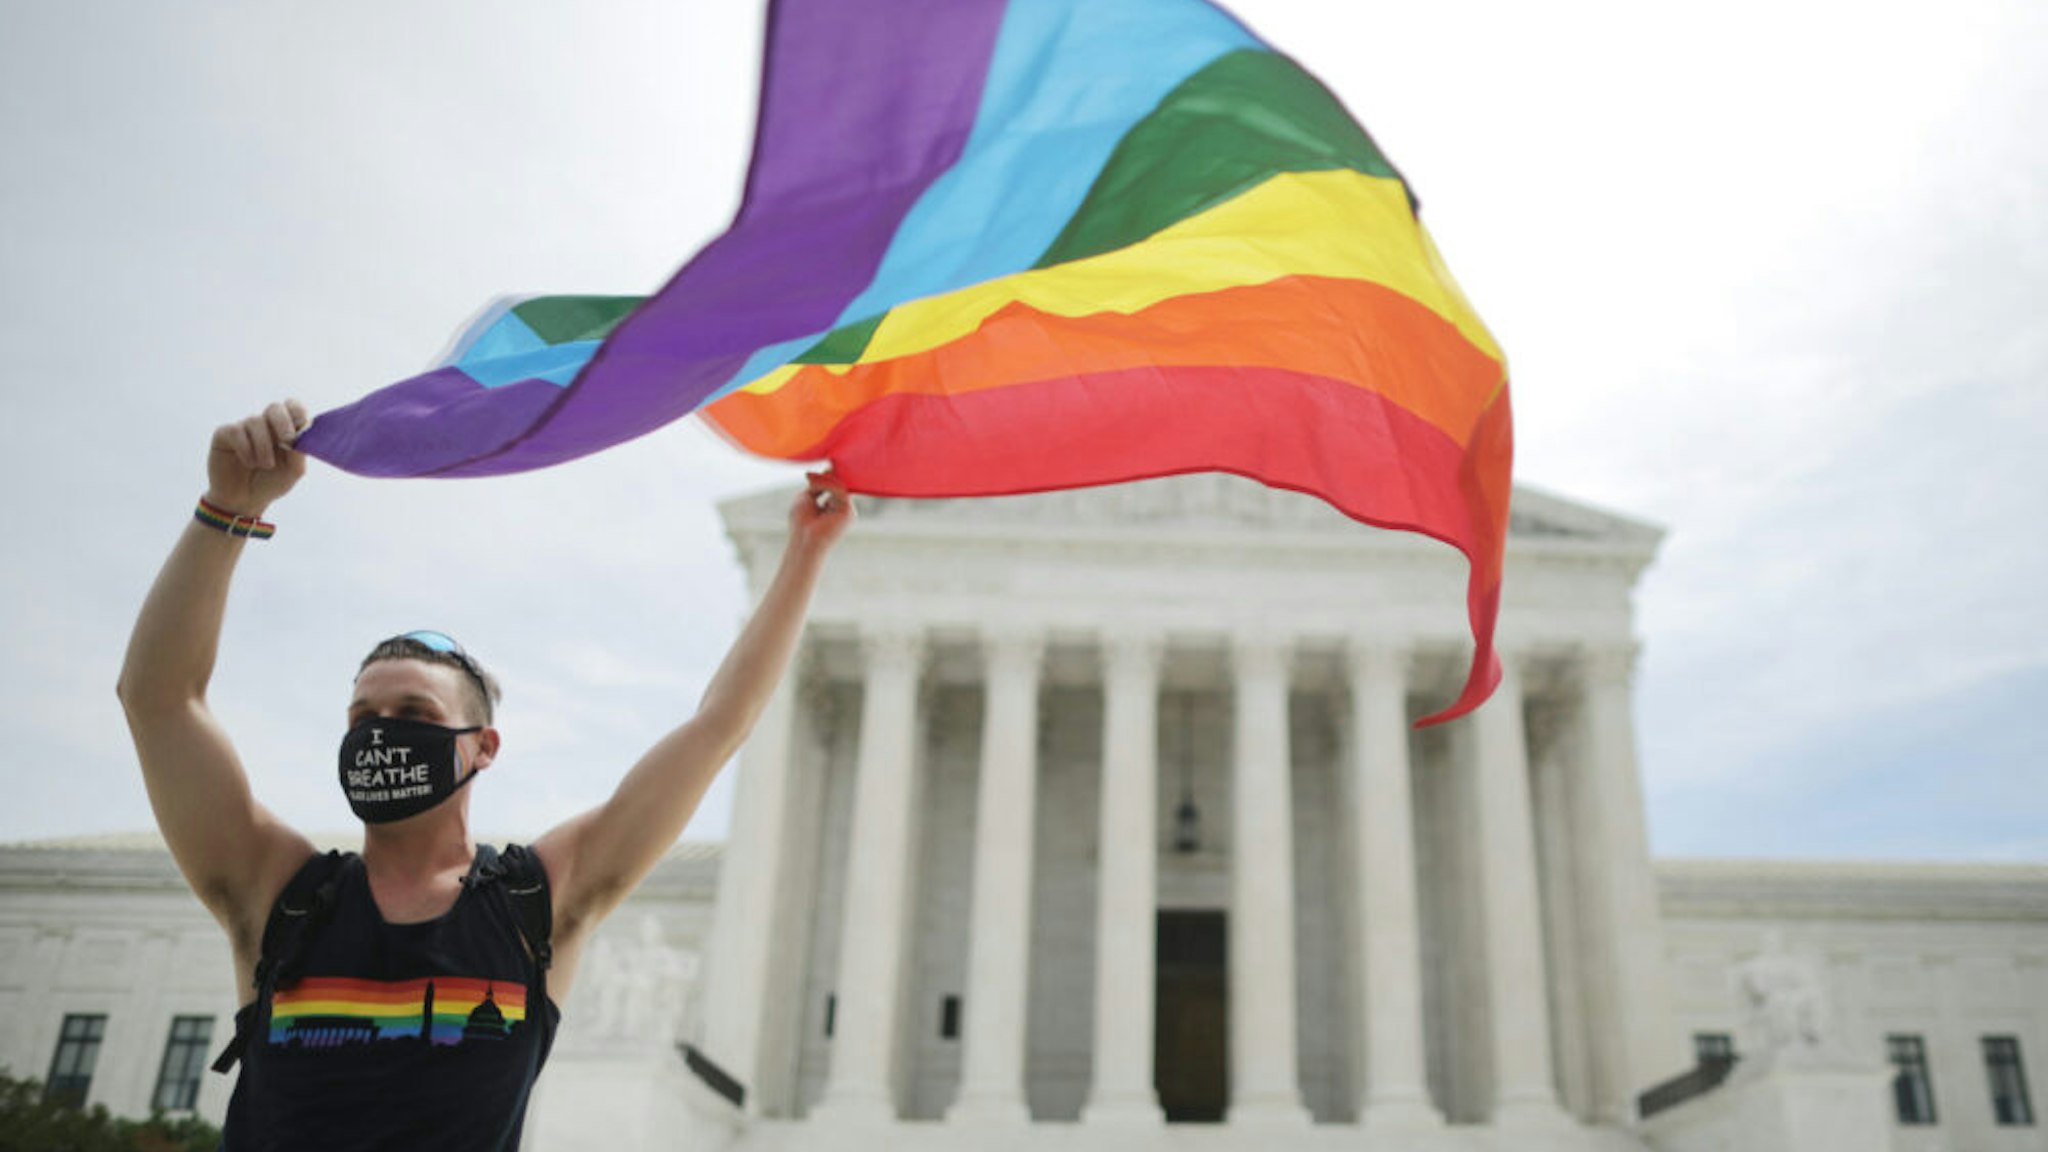 WASHINGTON, DC - JUNE 15: Joseph Fons holding a Pride Flag in front of the U.S. Supreme Court building after the court ruled that LGBTQ people can not be disciplined or fired based on their sexual orientation, Washington, DC, June 15, 2020. With Chief Justice John Roberts and Justice Neil Gorsuch joining the Democratic appointees, the court ruled 6-3 that the Civil Rights Act of 1964 bans bias based on sexual orientation or gender identity. Fons is wearing a Black Lives Matter mask with the words 'I Can't Breathe', as a precaution against Covid-19.